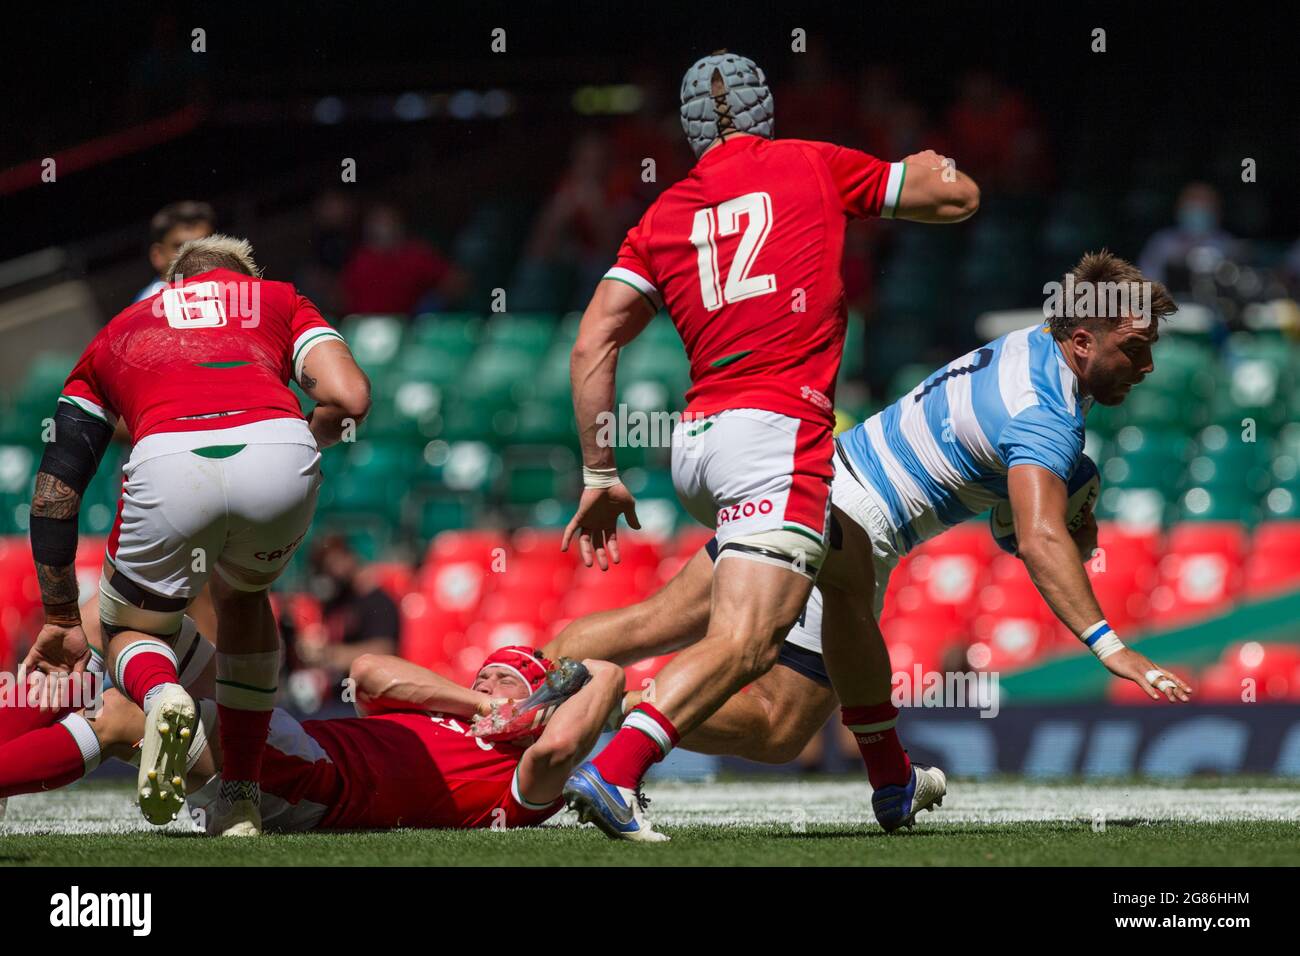 Cardiff, UK. 17th July, 2021. Cardiff, UK. July 17th : Facundo Isa (Argentina) controls the ball during the 2021 Summer Internationals match between Wales and Argentina at Principality Stadium. Credit: Federico Guerra Morán/Alamy Live News Stock Photo